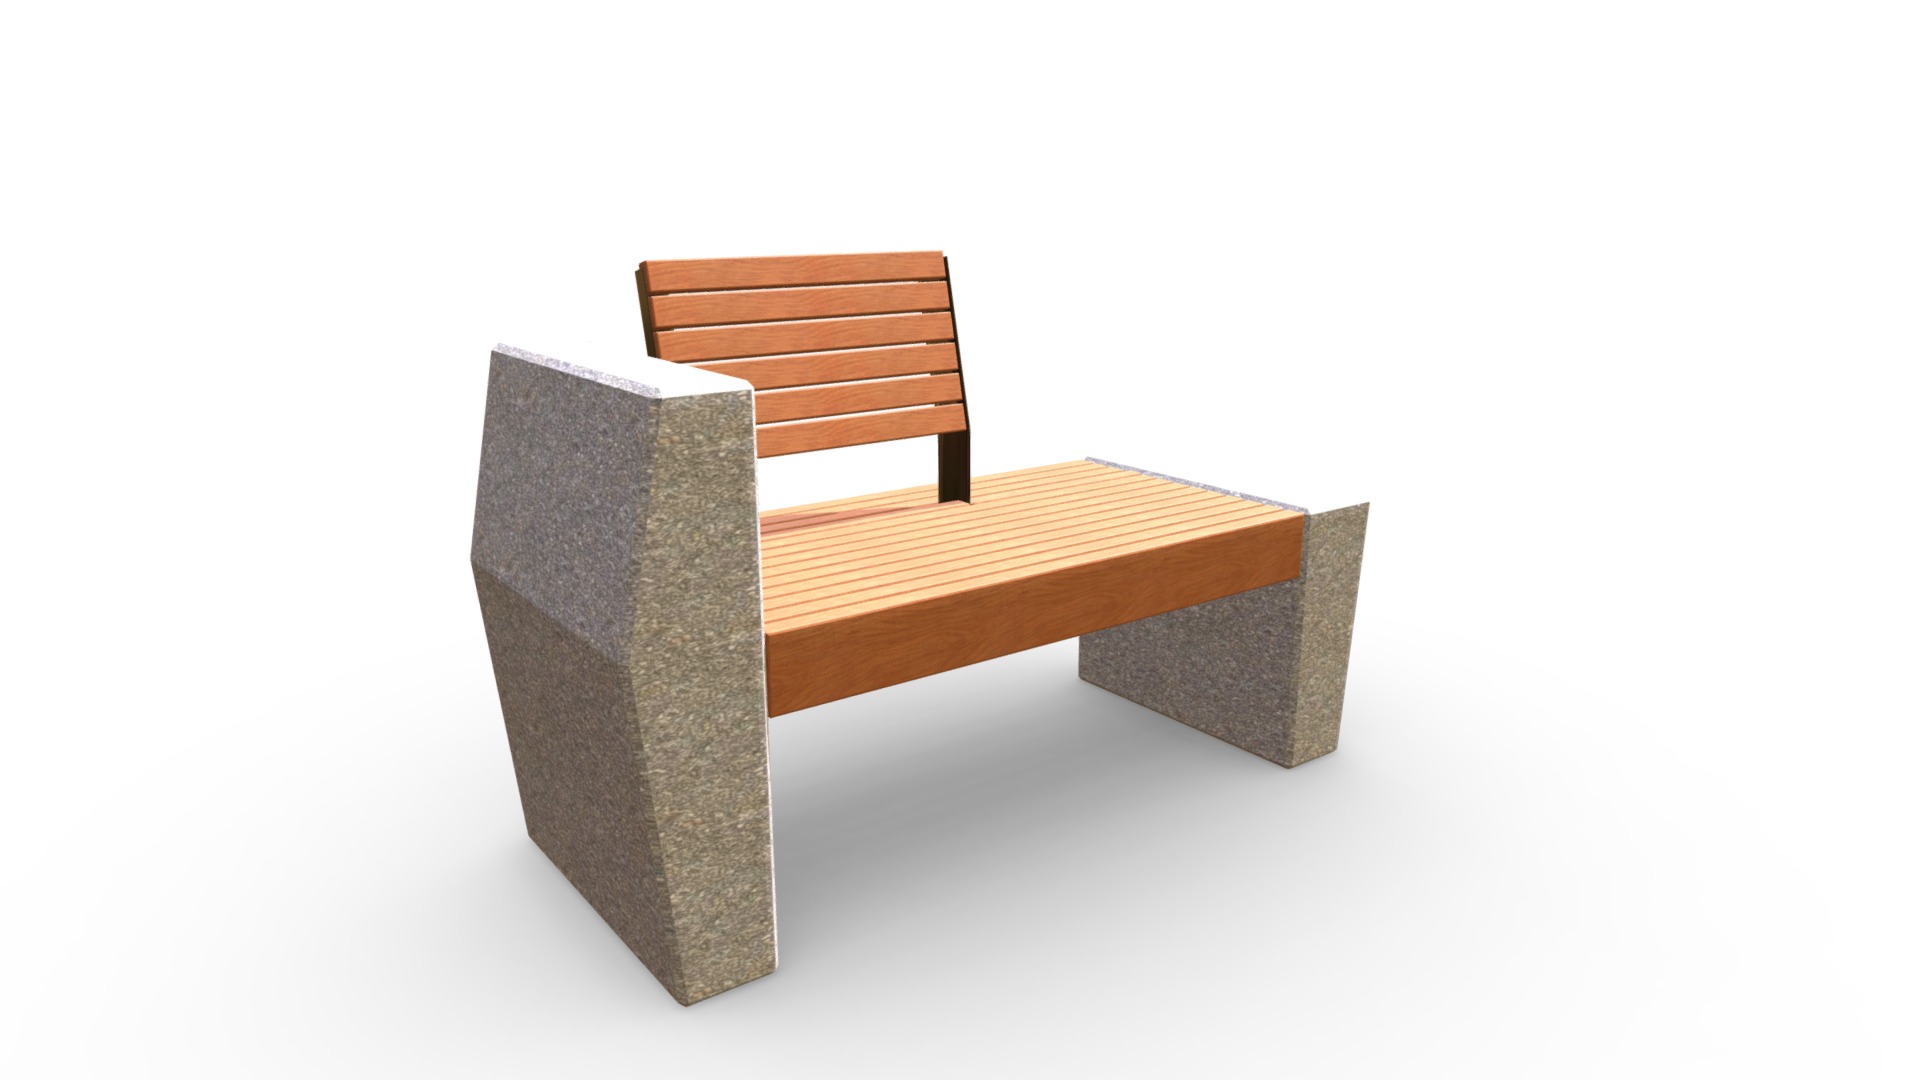 3D model Kolekcija 1-1 - This is a 3D model of the Kolekcija 1-1. The 3D model is about a small wooden bench.